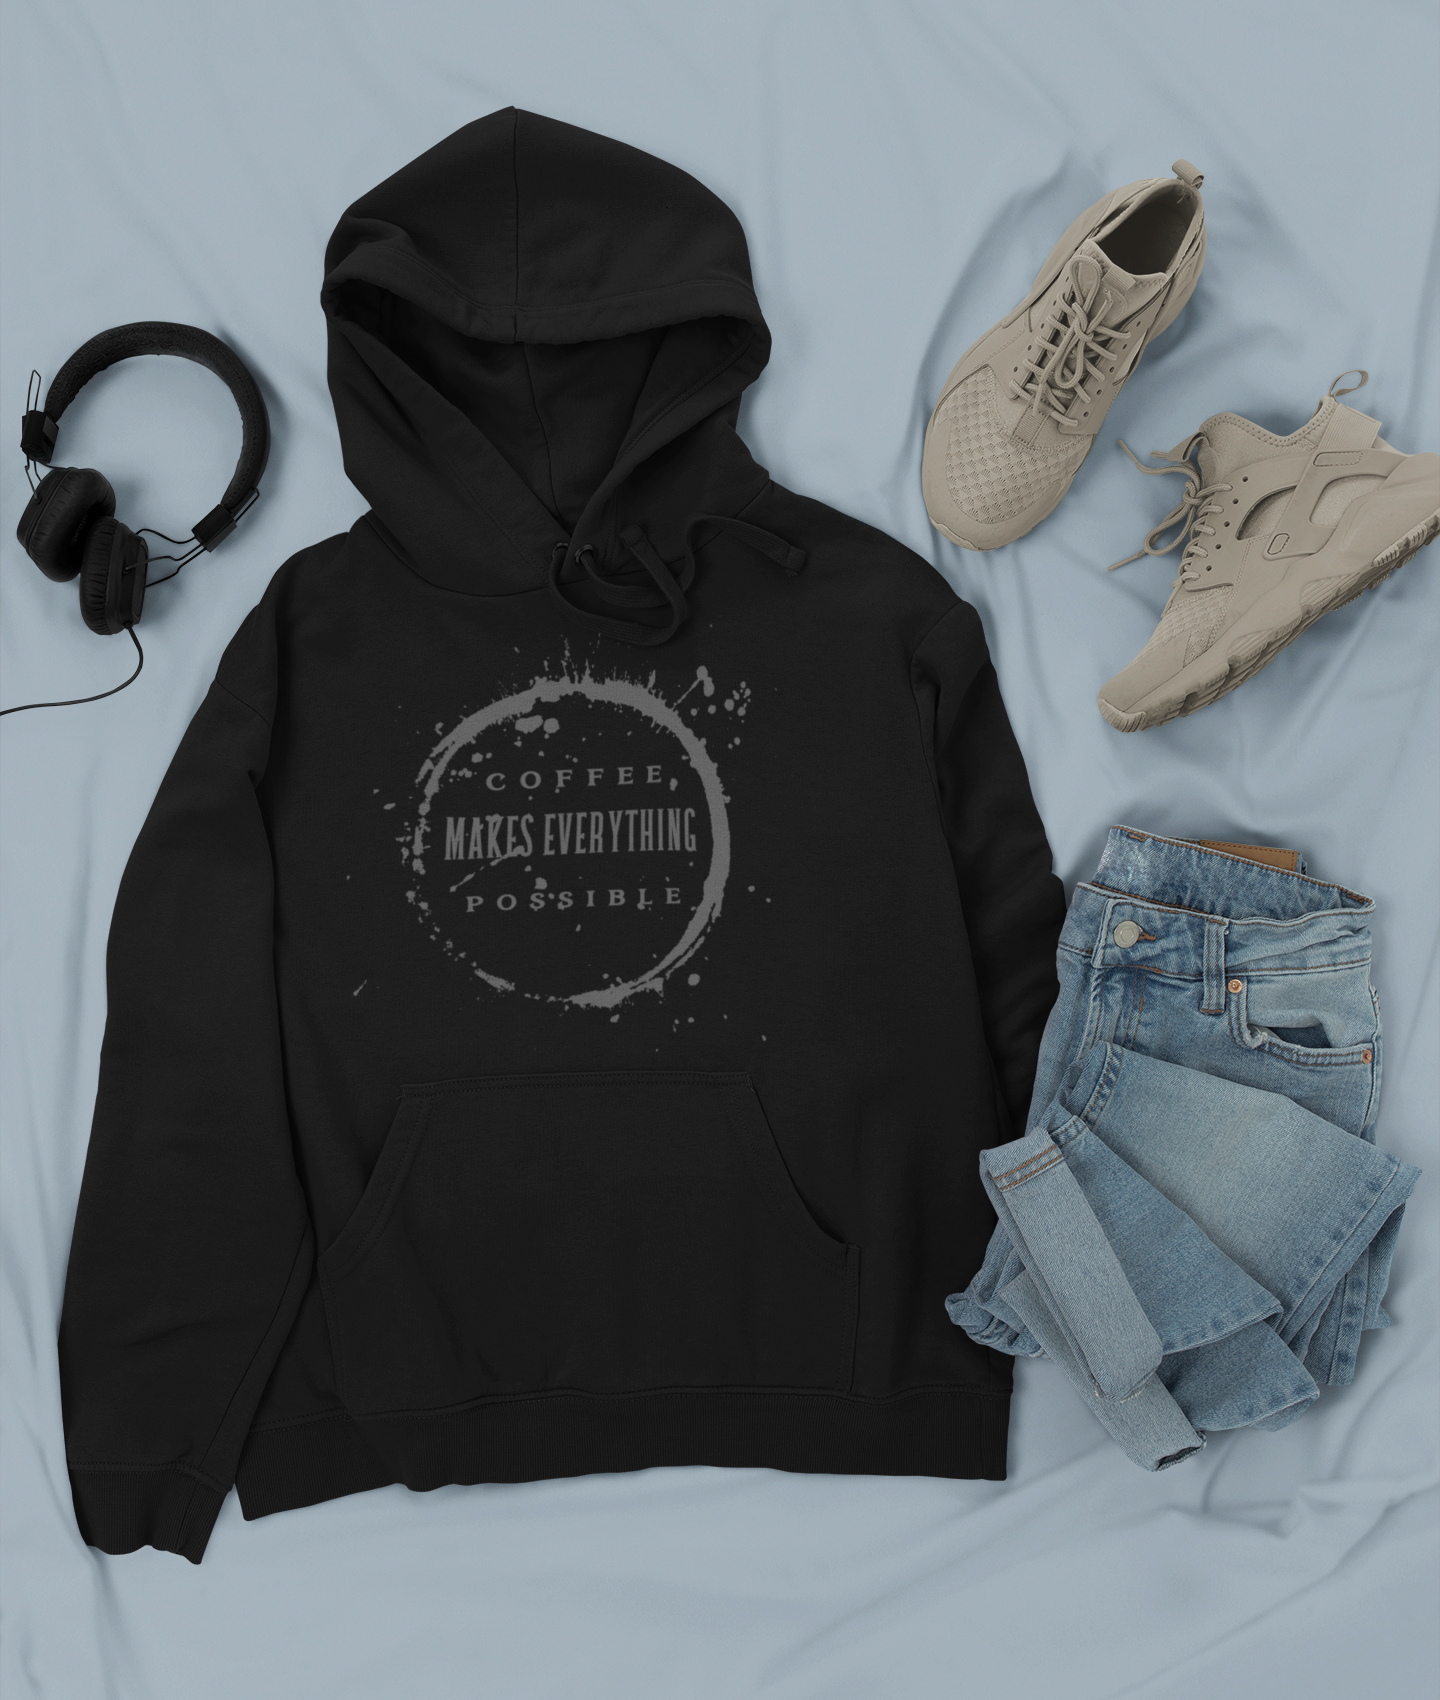 "Coffee, makes everything possible" Unisex Hoodie